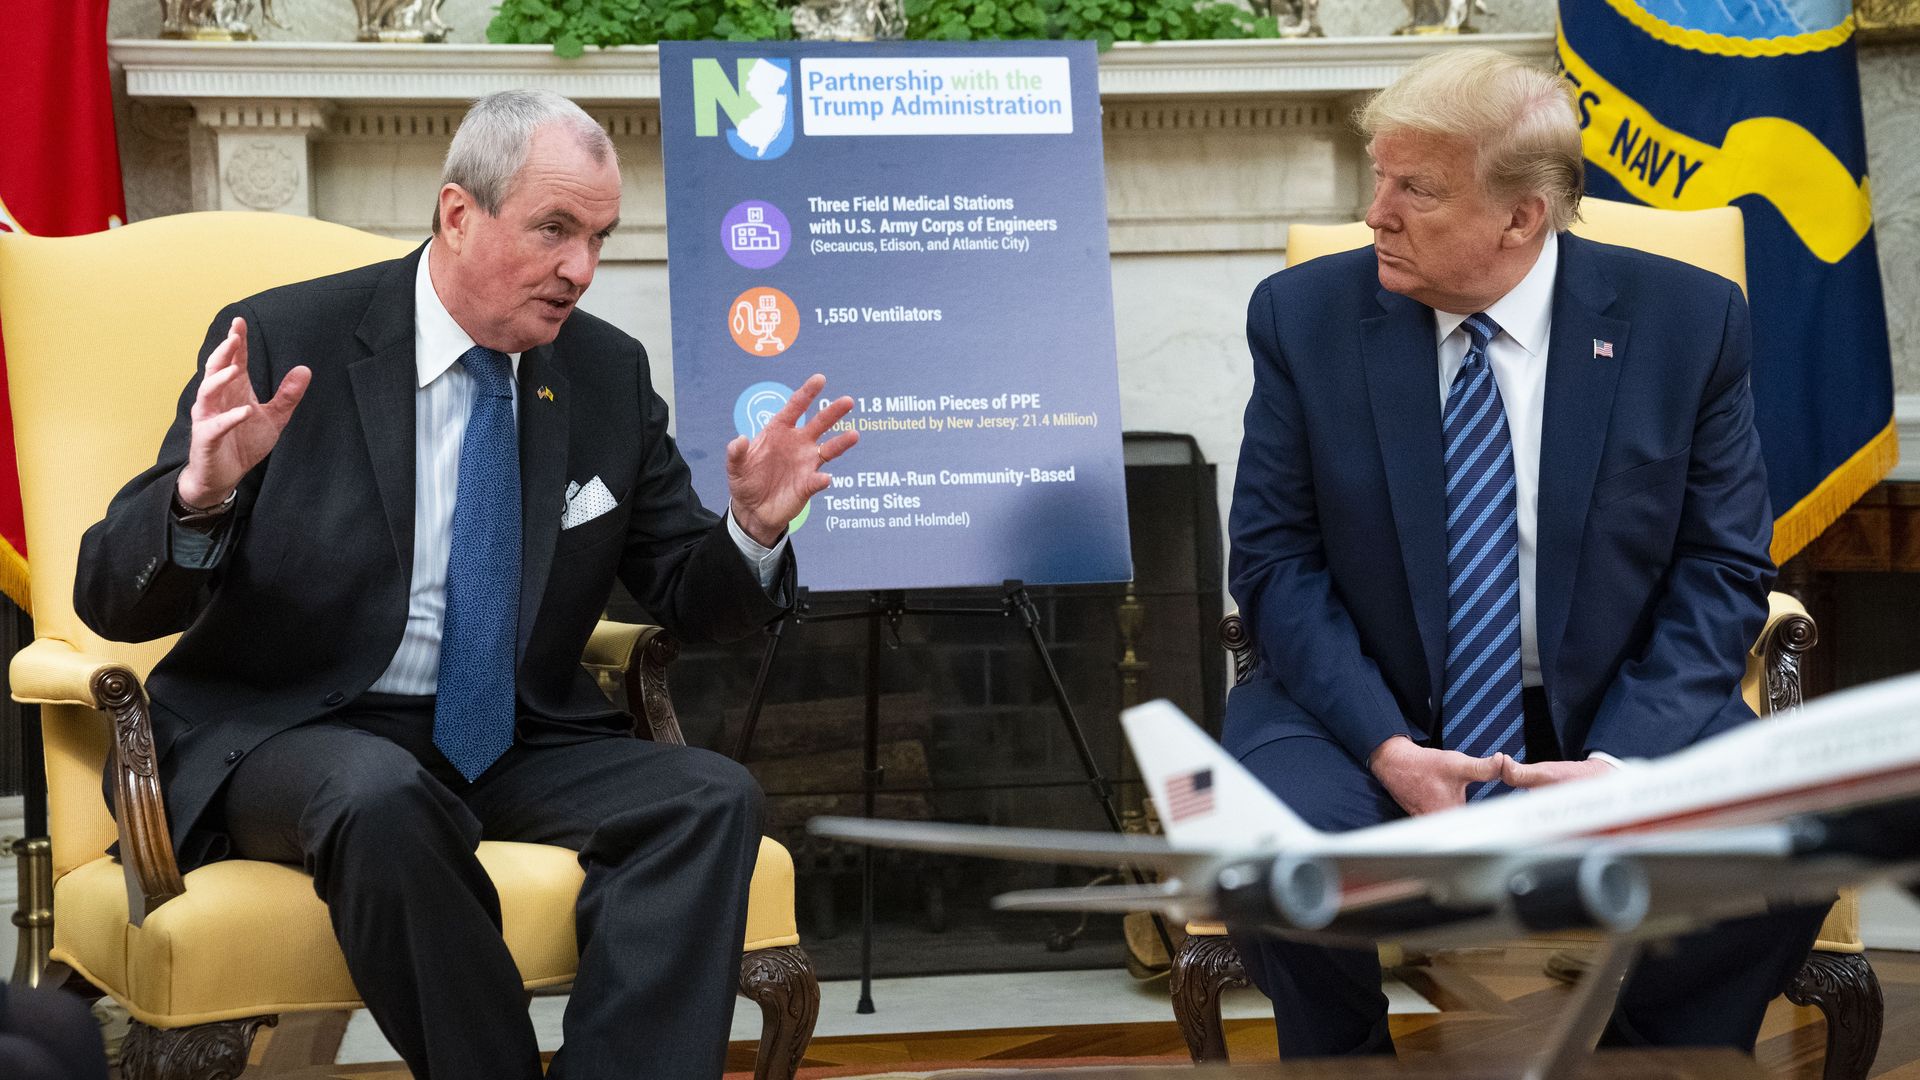  U.S. President Donald Trump meets with New Jersey Gov. Phil Murphy (L) in the Oval Office of the White House April 30, 2020 in Washington, DC.